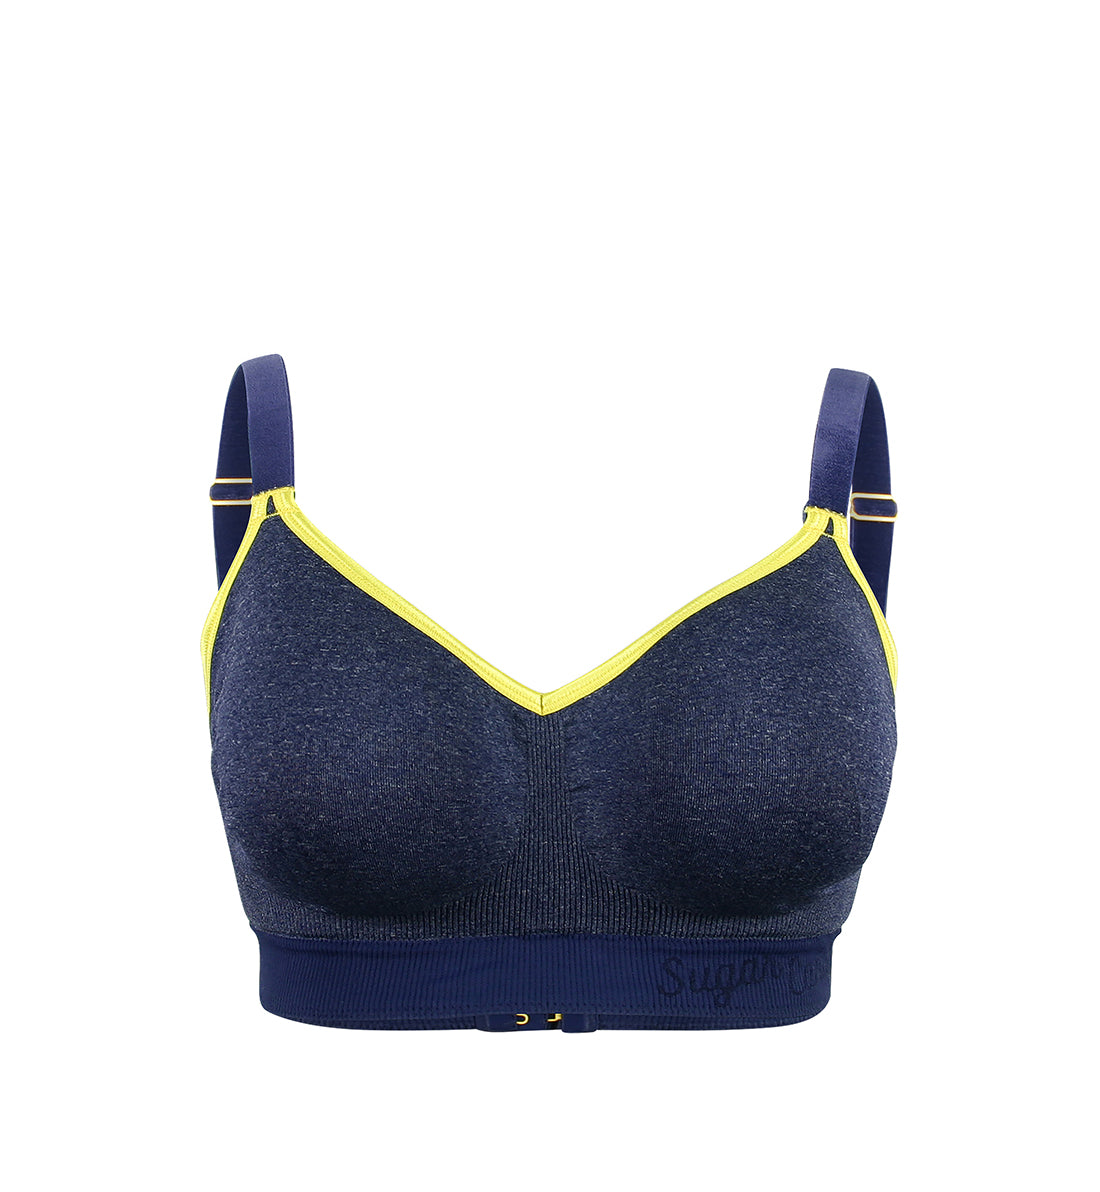 Sugar Candy by Cake Crush Seamless Fuller Bust Everyday Softcup G-L Cups (28-8008),XS,Denim - Denim,XS